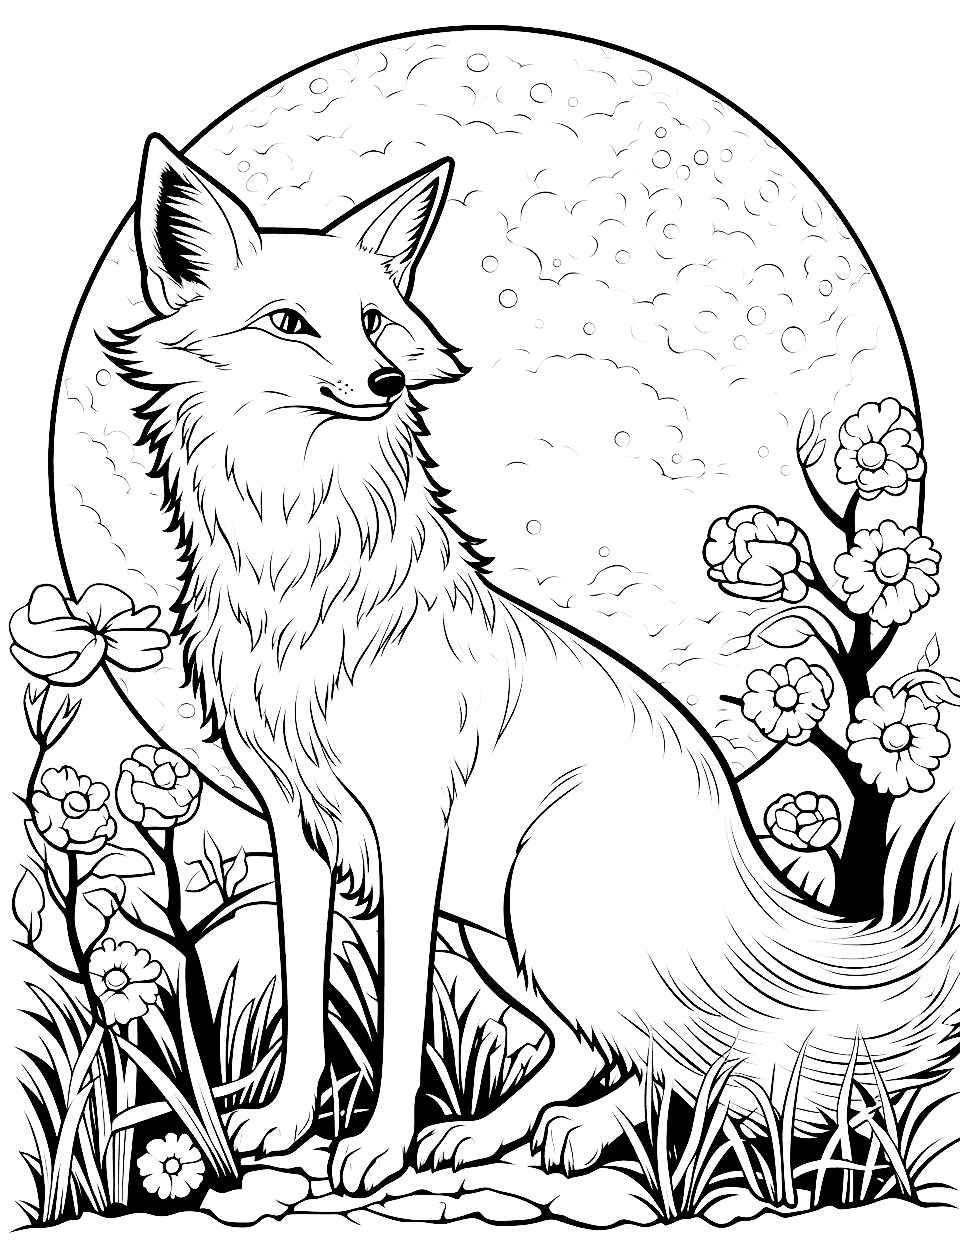 Fox's Moonlit Hunt Adult Coloring Page - A fox with alert ears against a moonlit backdrop.